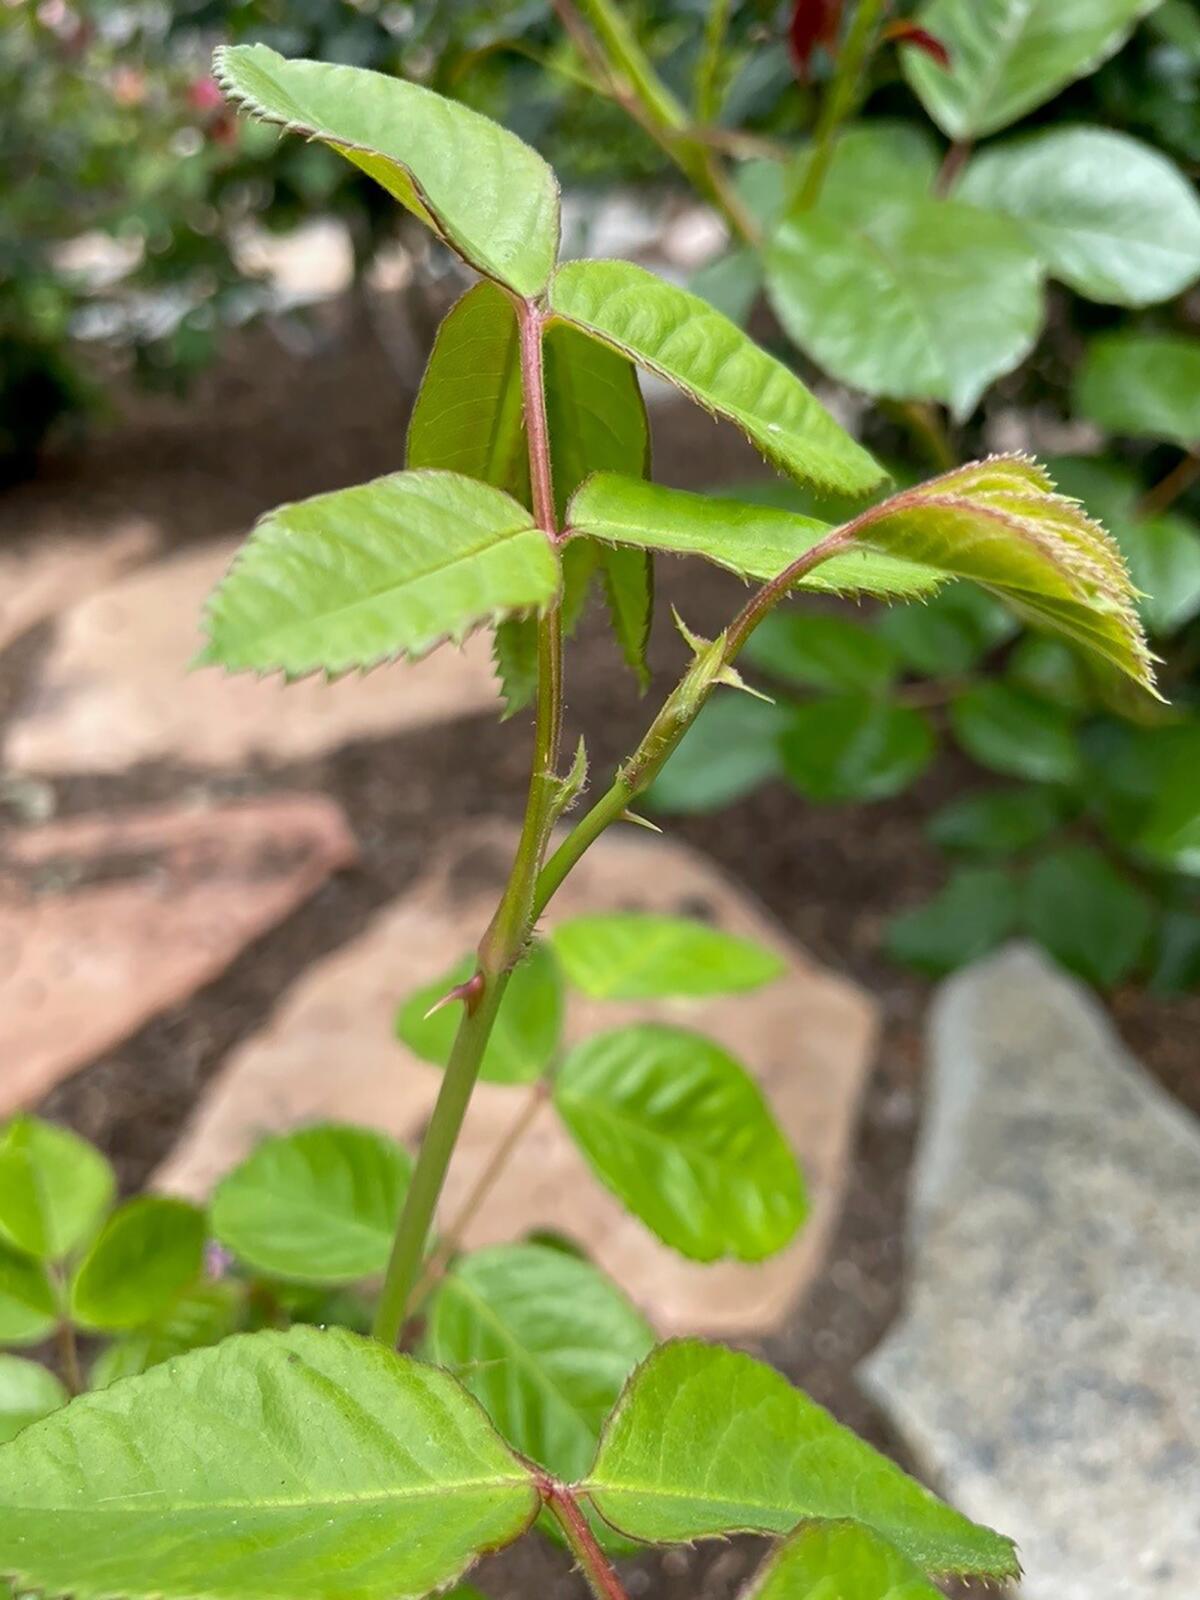 A rosebush has a blind shoot, when a stem terminates in leafy growth in place of a bud.